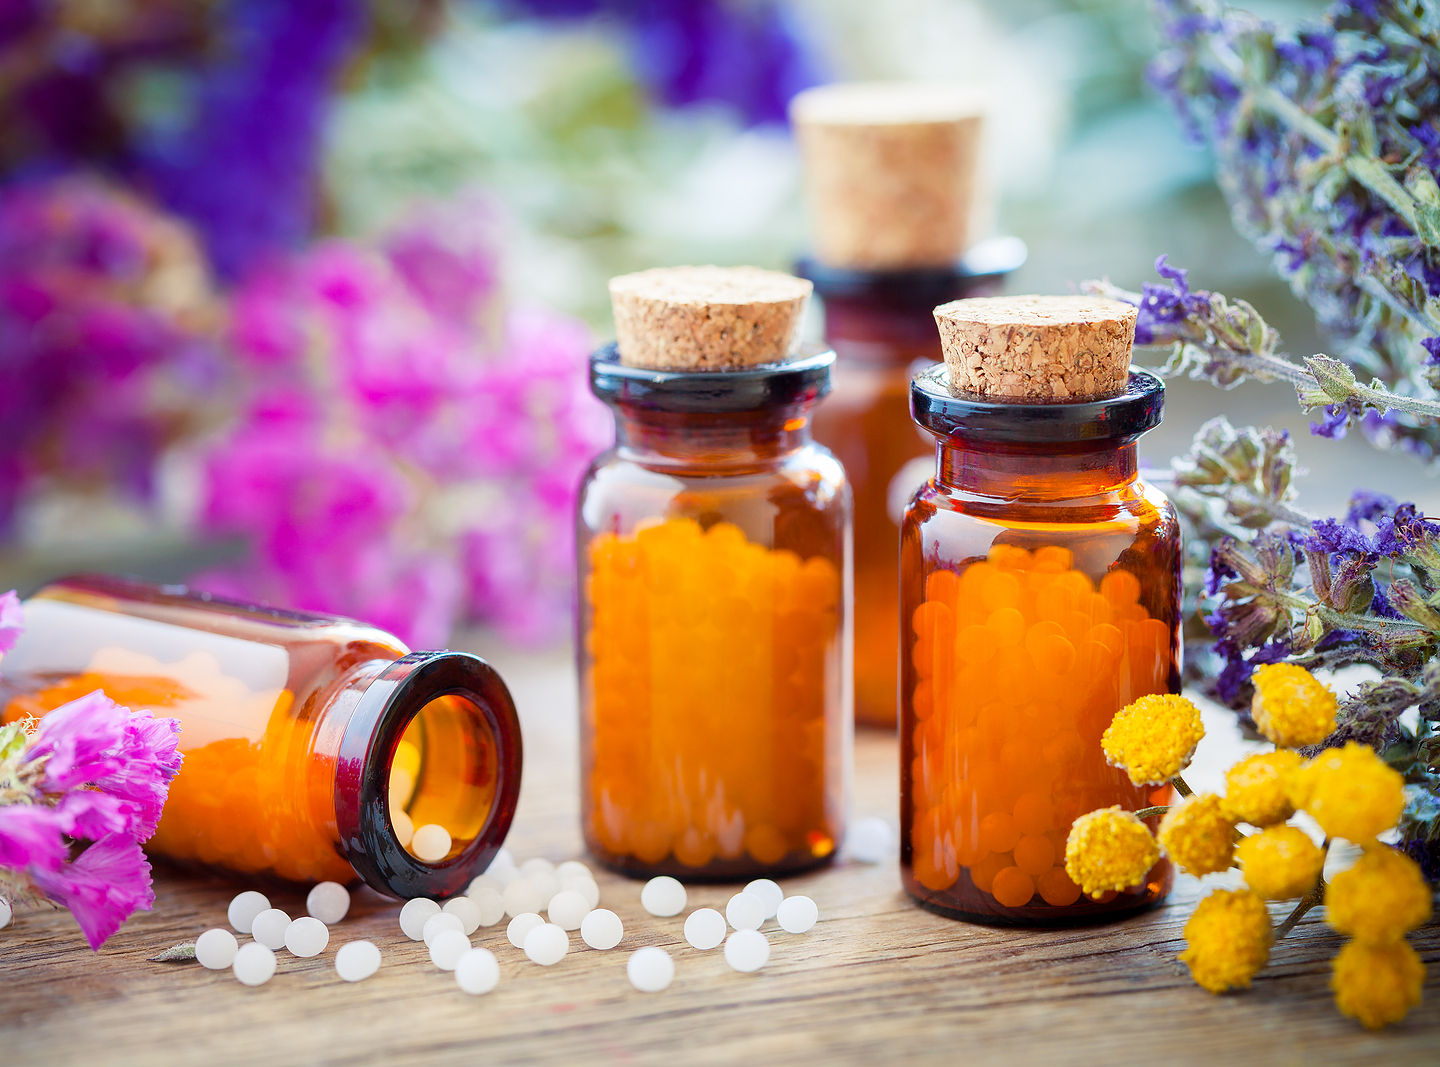 Bottles of homeopathic pills, which might treat problems such as infections, arthritis, weight problems, hot flushes, and more.